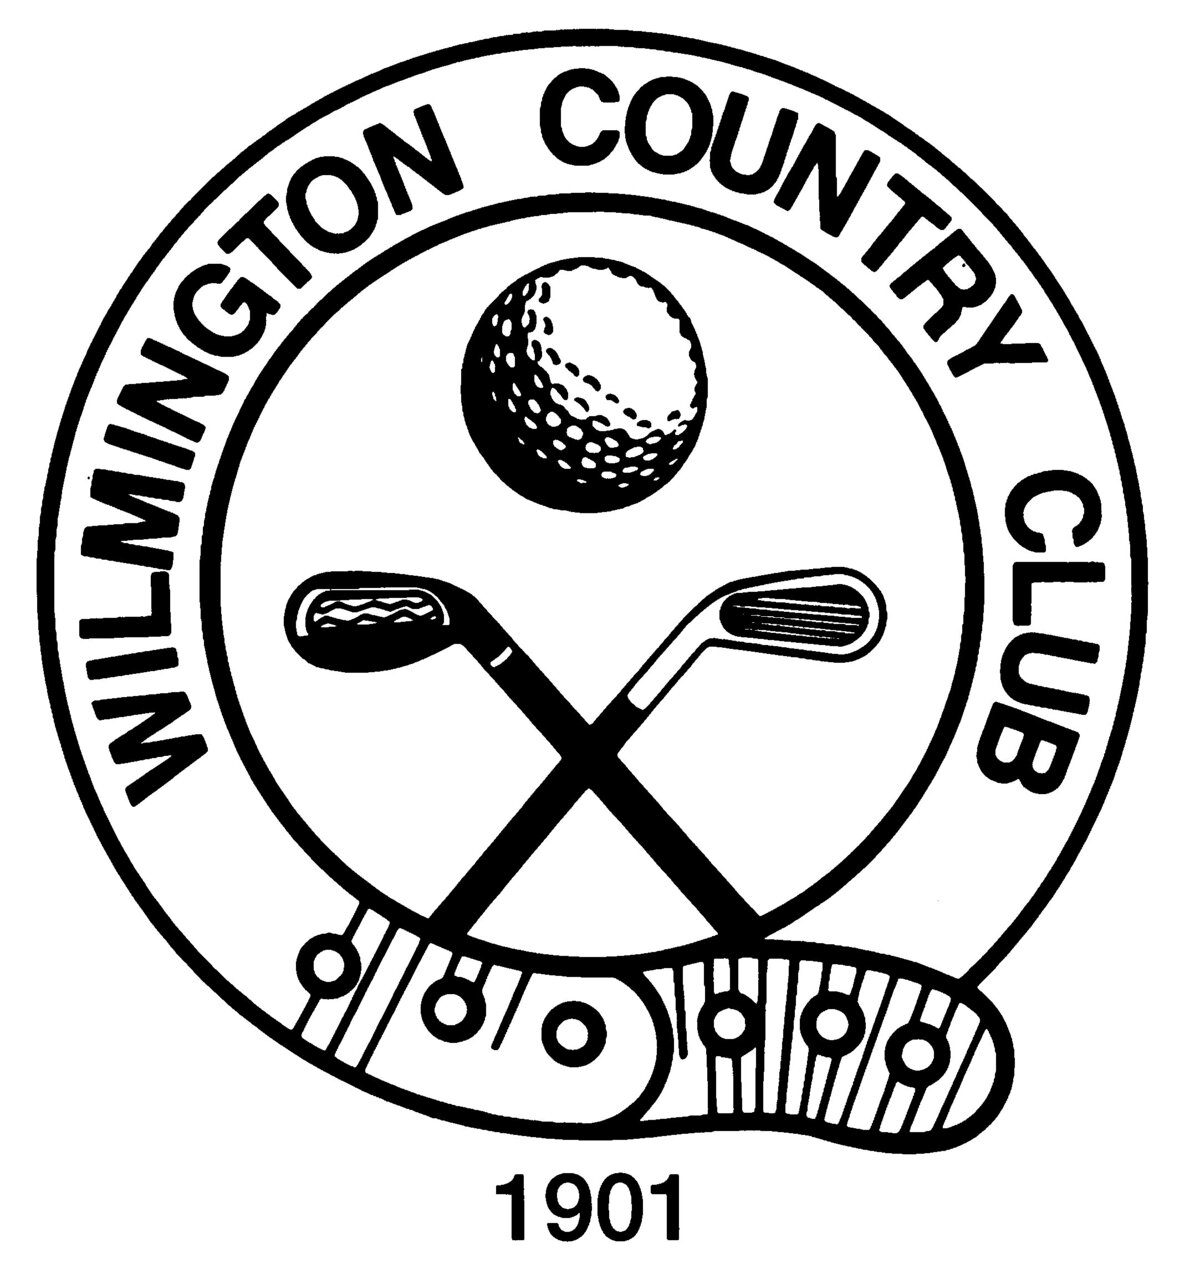 Wilmington Country Club